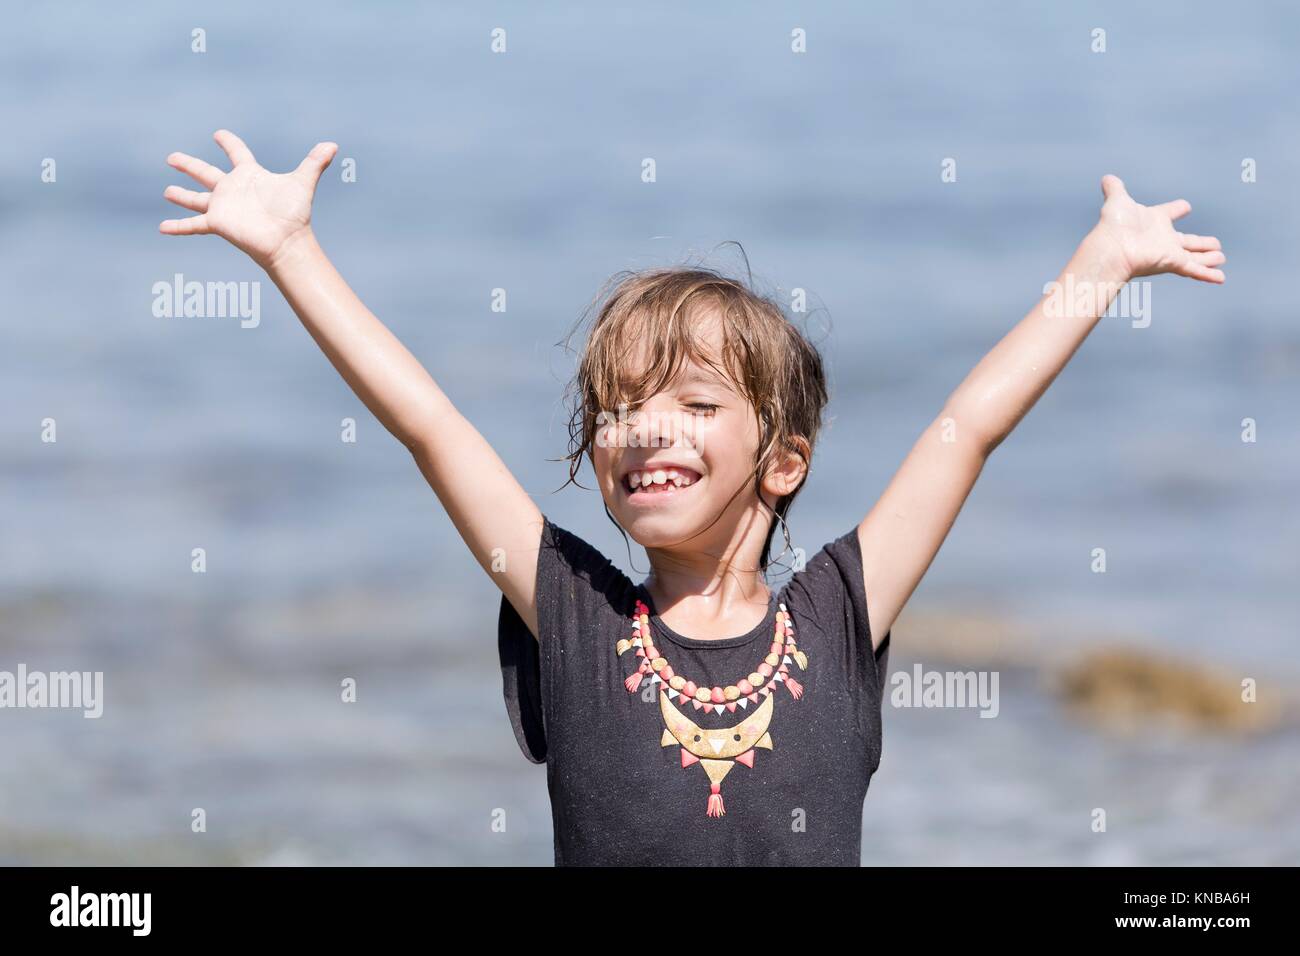 Girl with arms raised and smiling face. Stock Photo